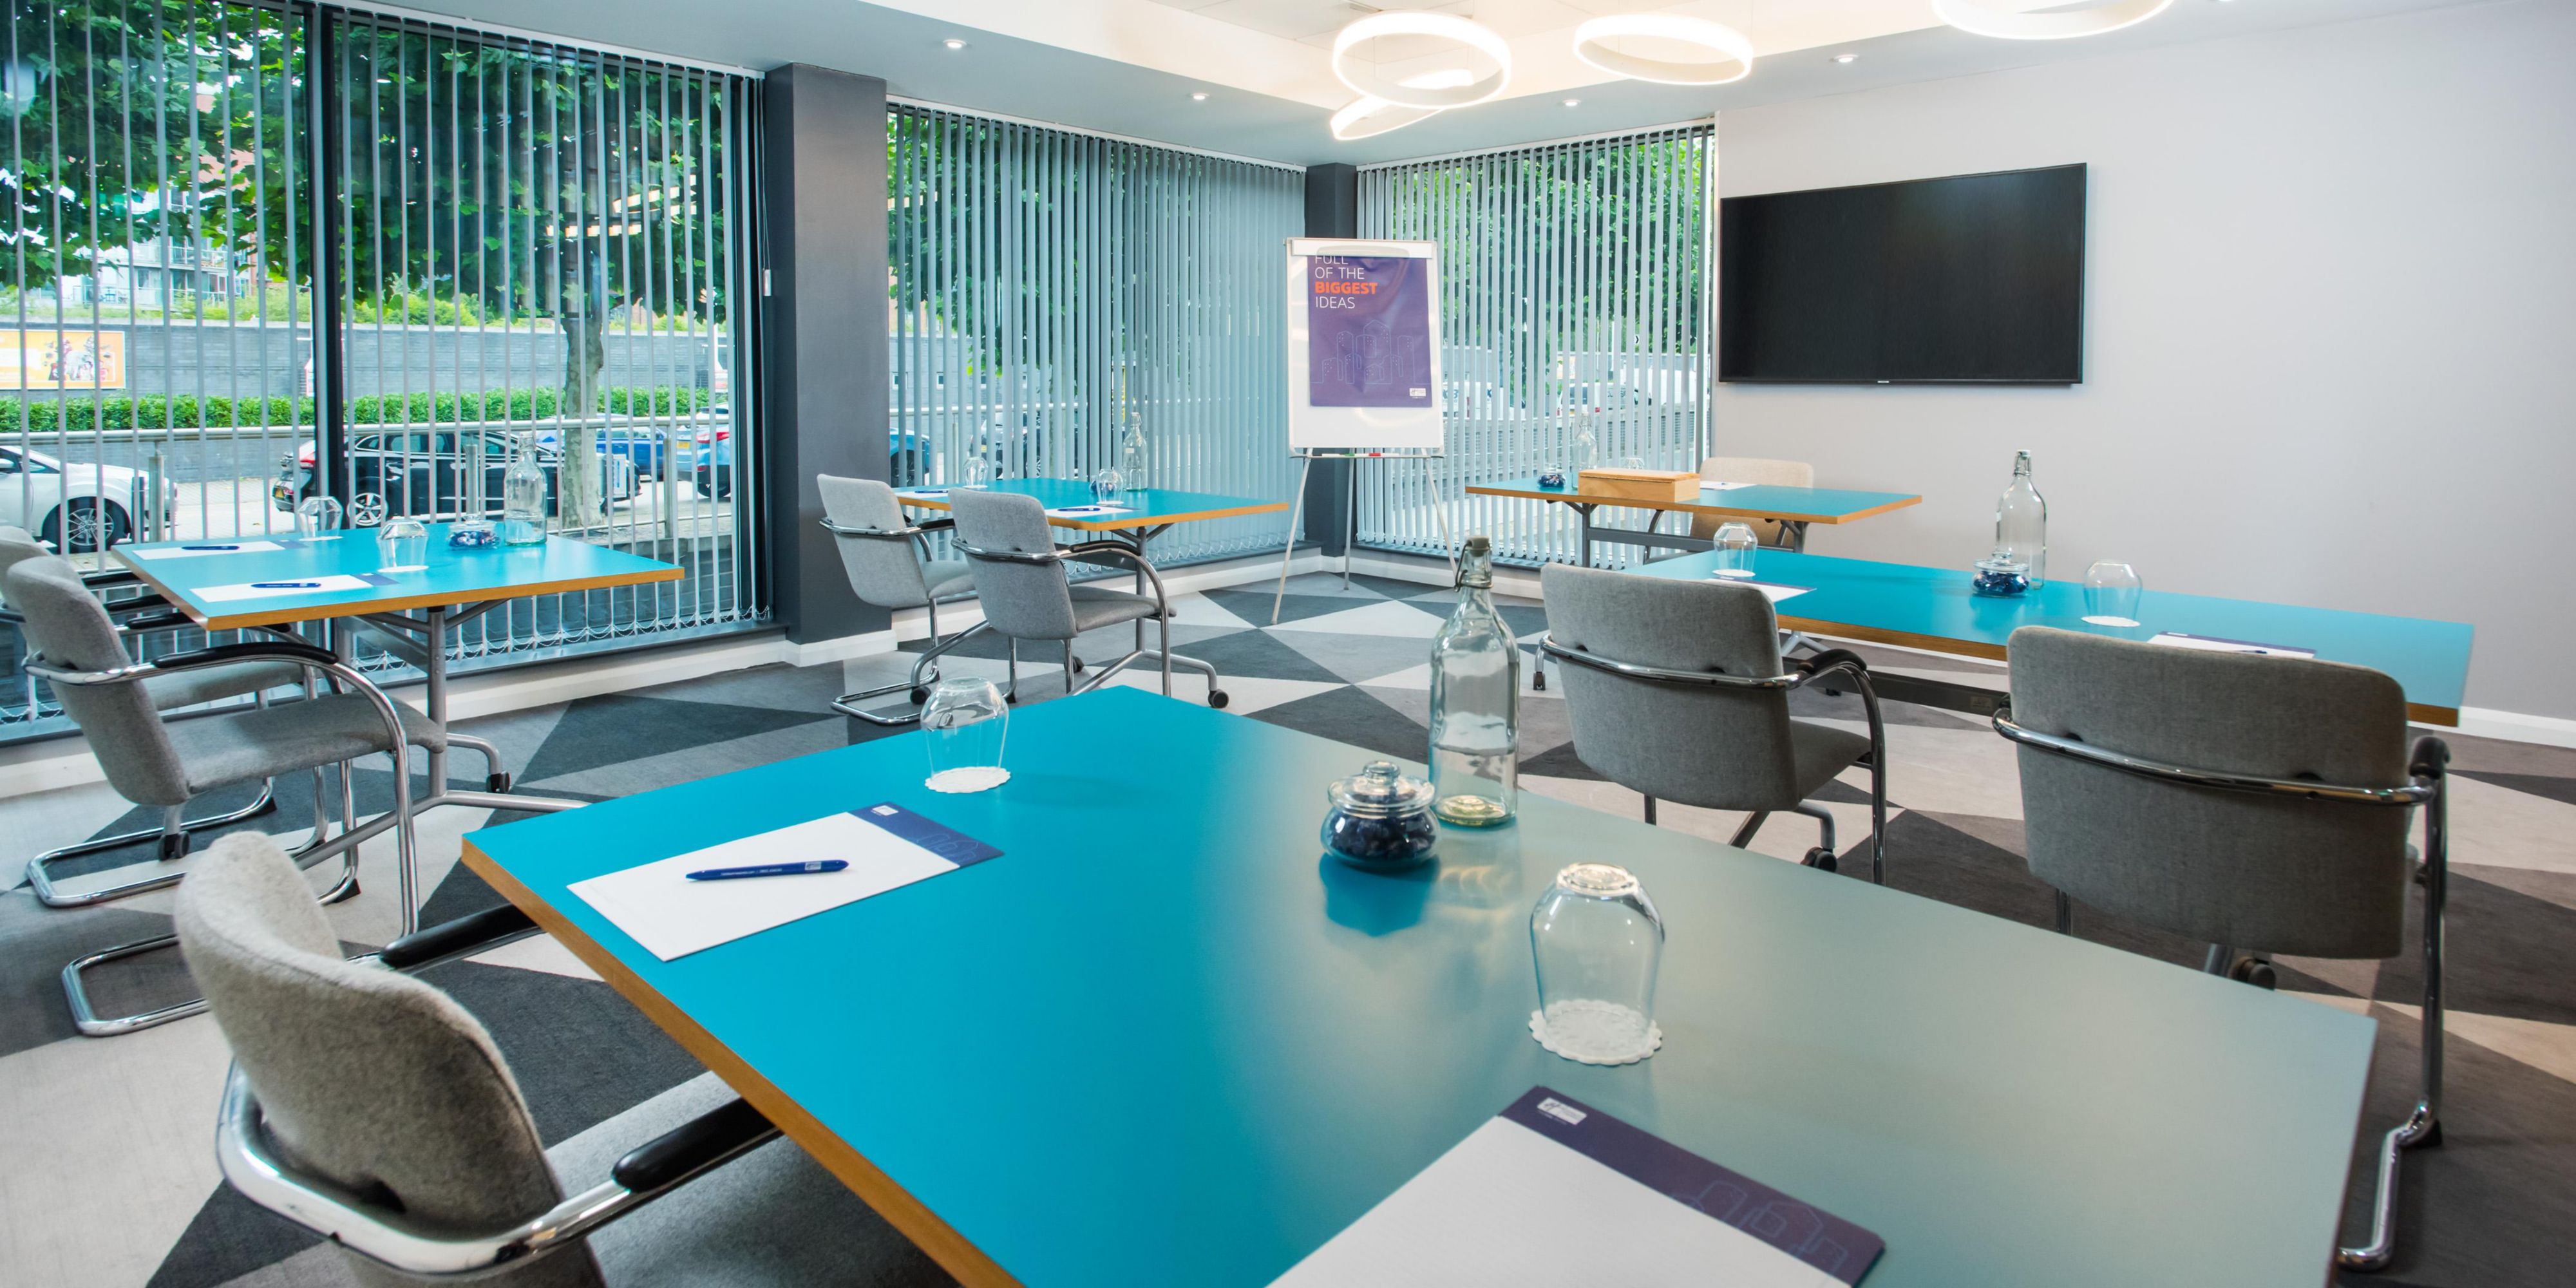 Our modern meeting facilities are ideal for get-togethers of anywhere from 2 to 80 attendees. We can provide lunches and accommodation for those travelling from further afield and our convenient location is handy for those on public transport or coming by car.